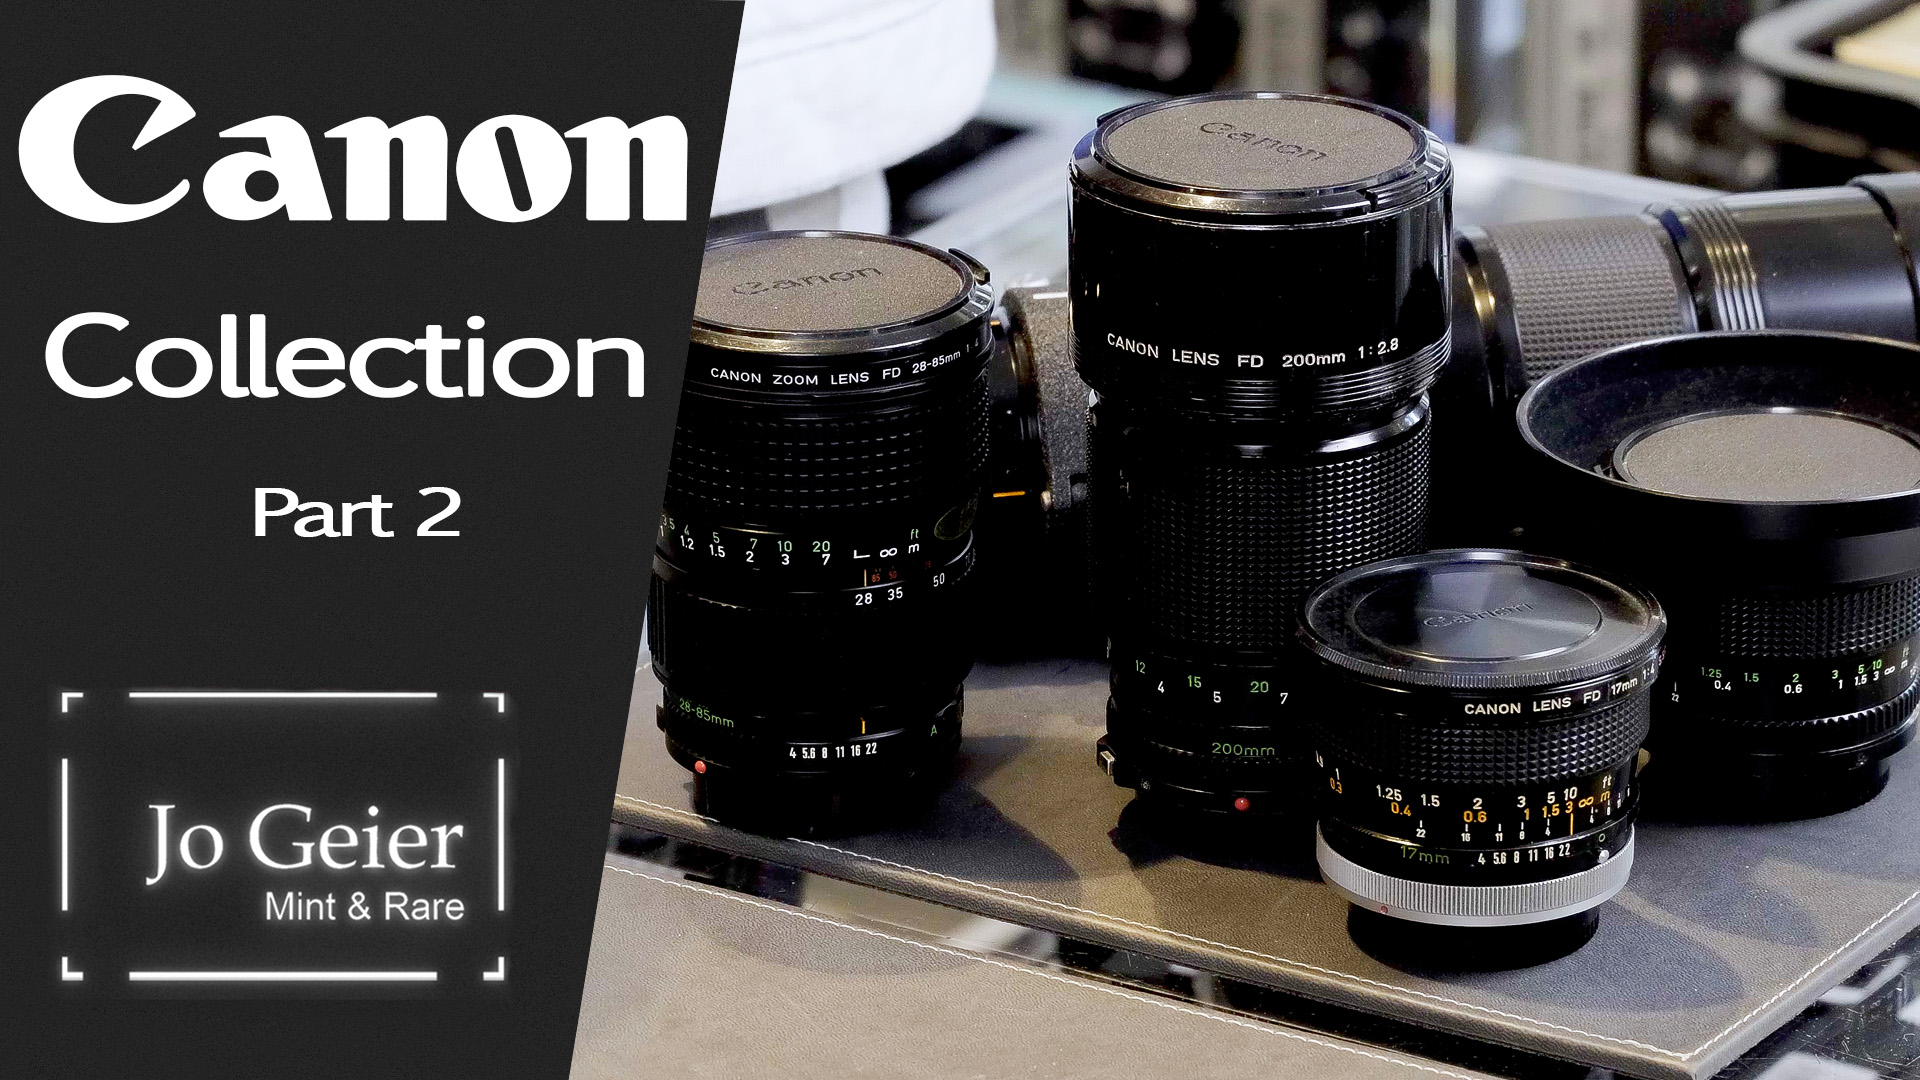 Canon FD Camera Collection - New Arrival Unboxing - Part Two - Jo Geier - Mint & Rare